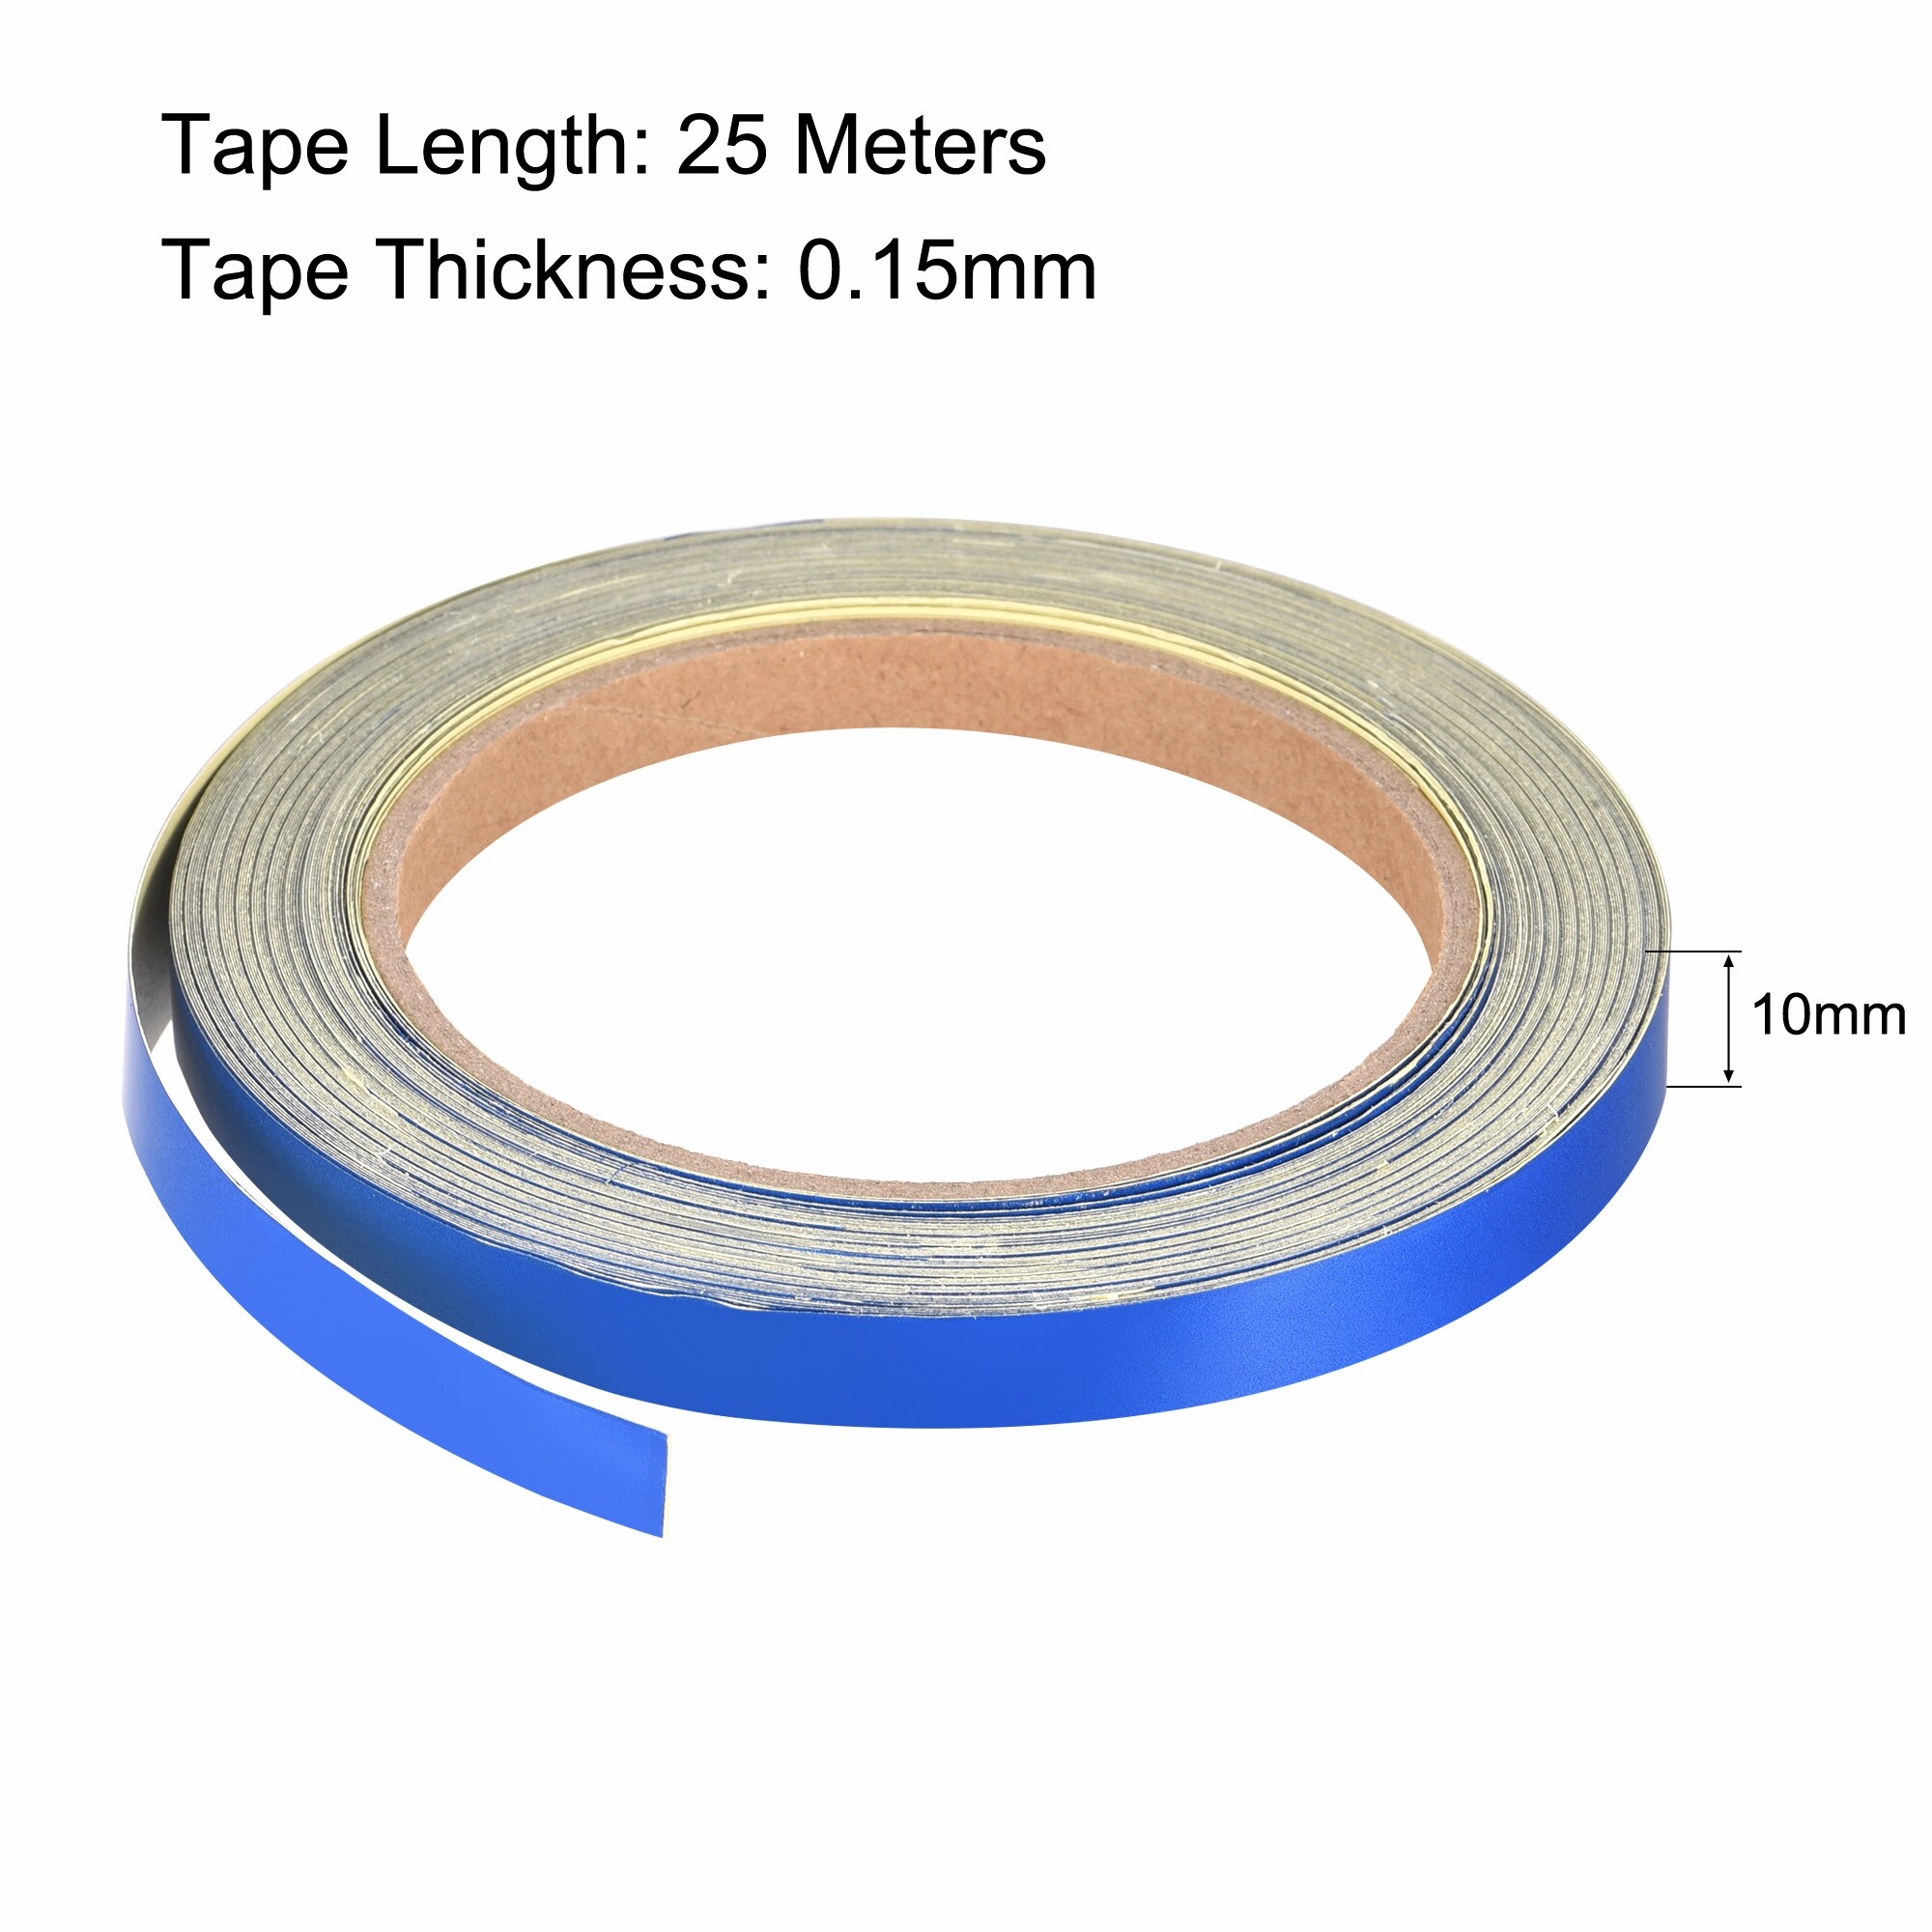 Reflective Tape, 10mm x 25m, Outdoor Waterproof Warning Tape For Bikes